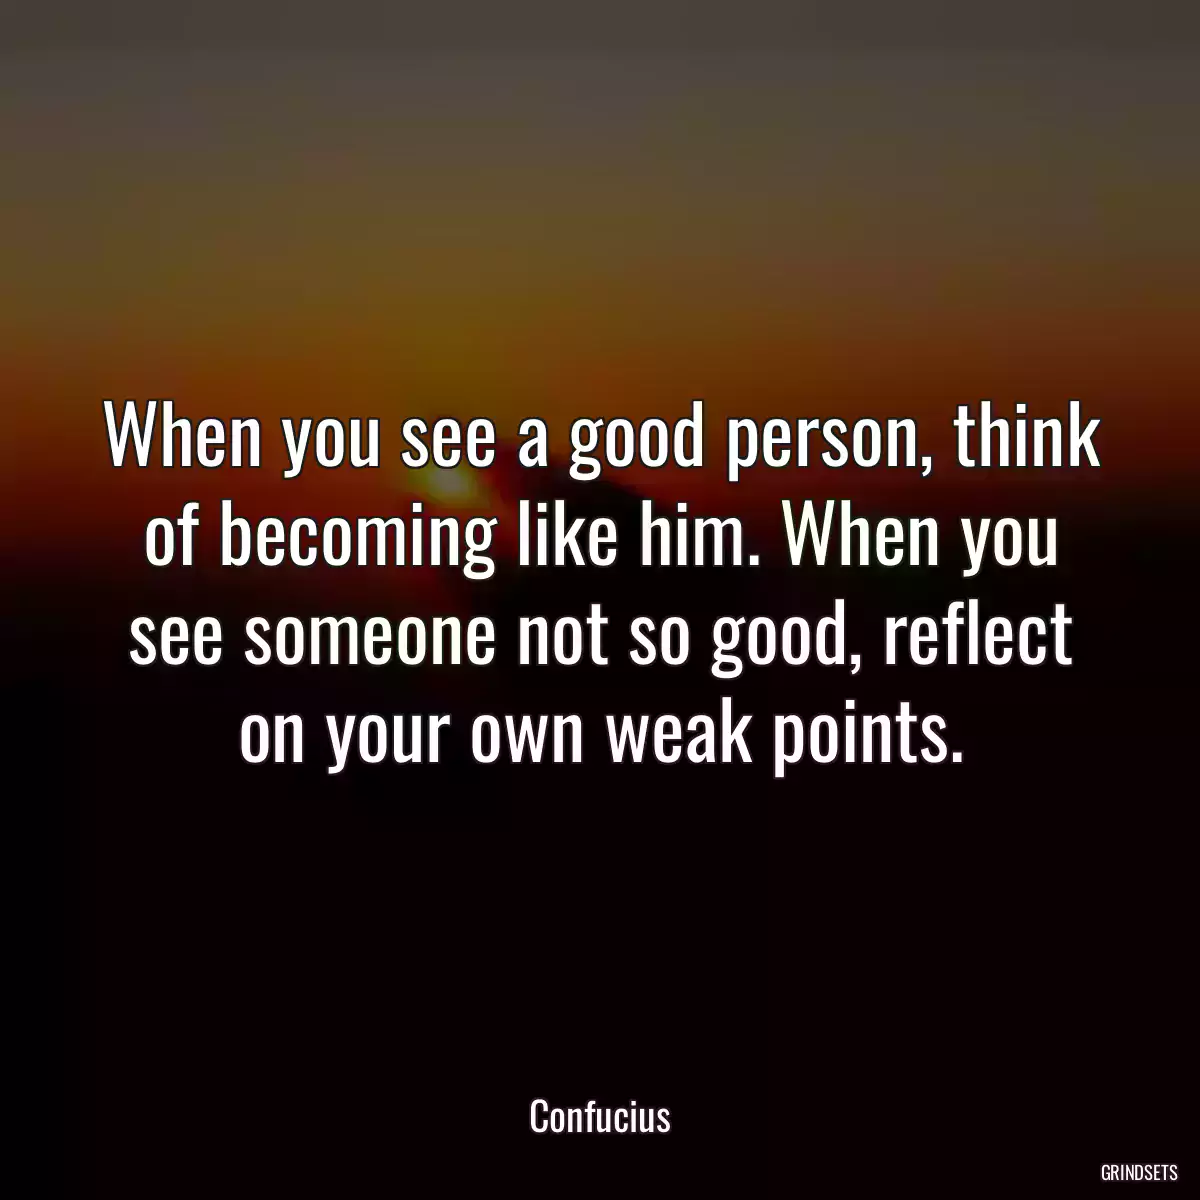 When you see a good person, think of becoming like him. When you see someone not so good, reflect on your own weak points.